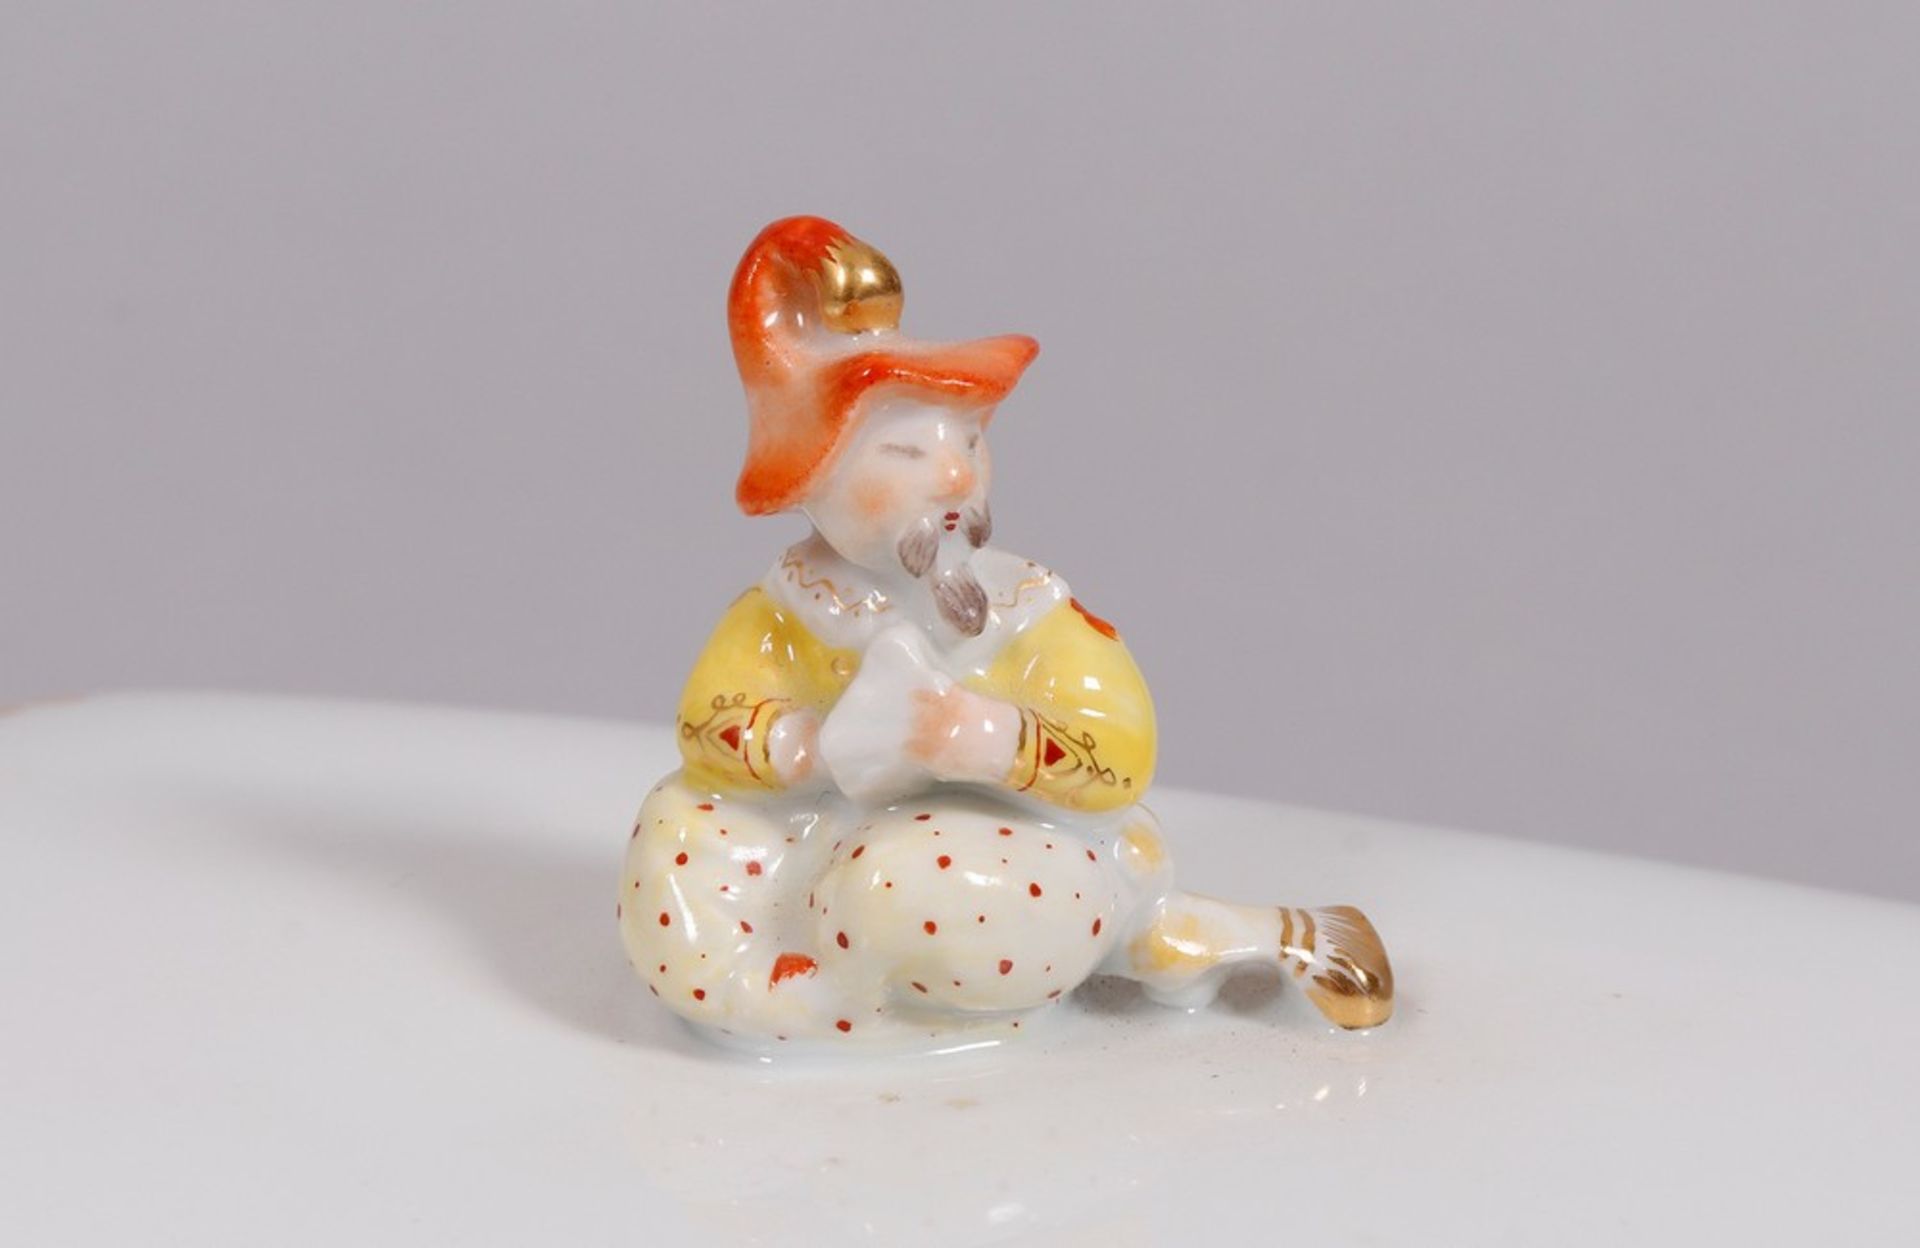 "Dose mit Chinesen" (lidded box with chinese figure), design 1929 by Paul Scheurich for Meissen, ma - Image 2 of 8